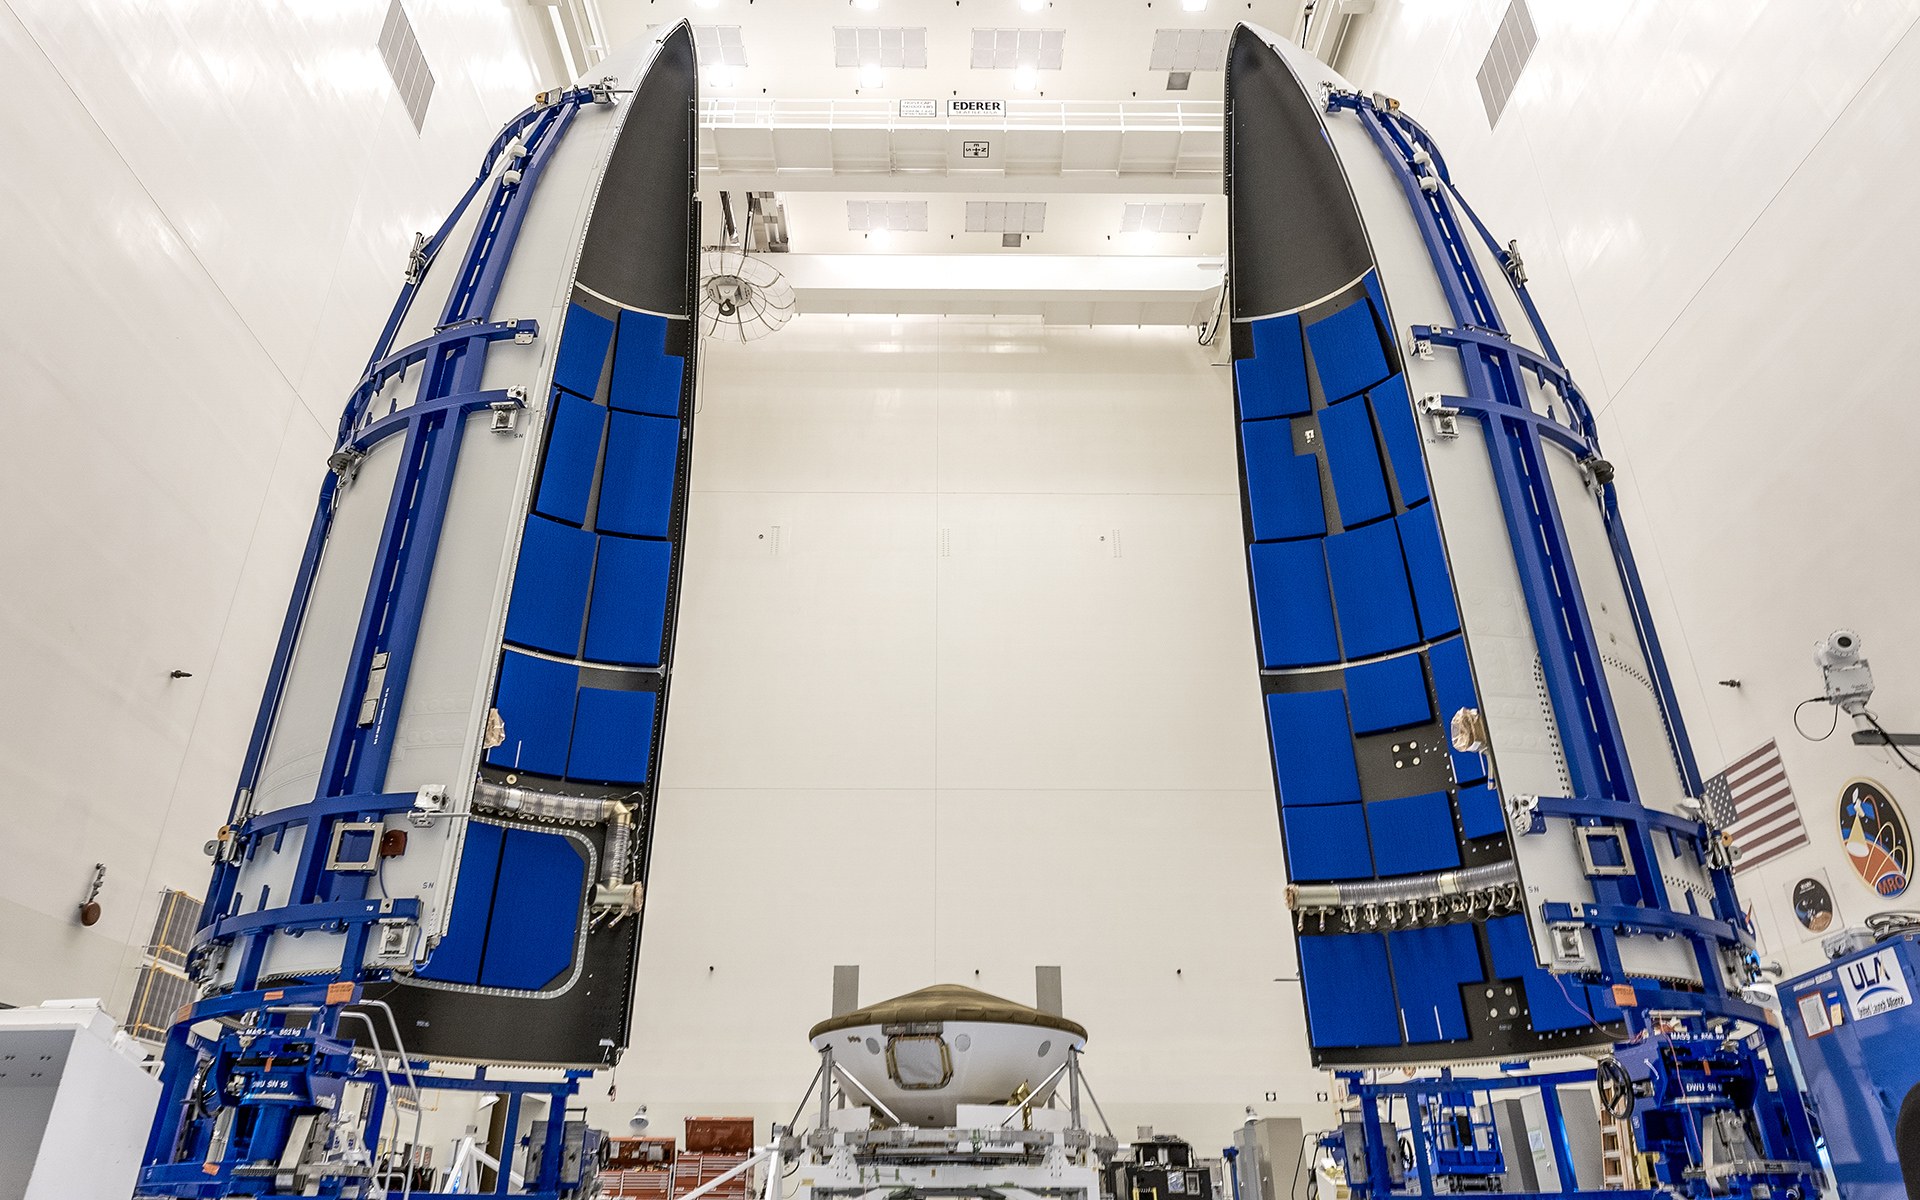 Mars 2020 ready for launch